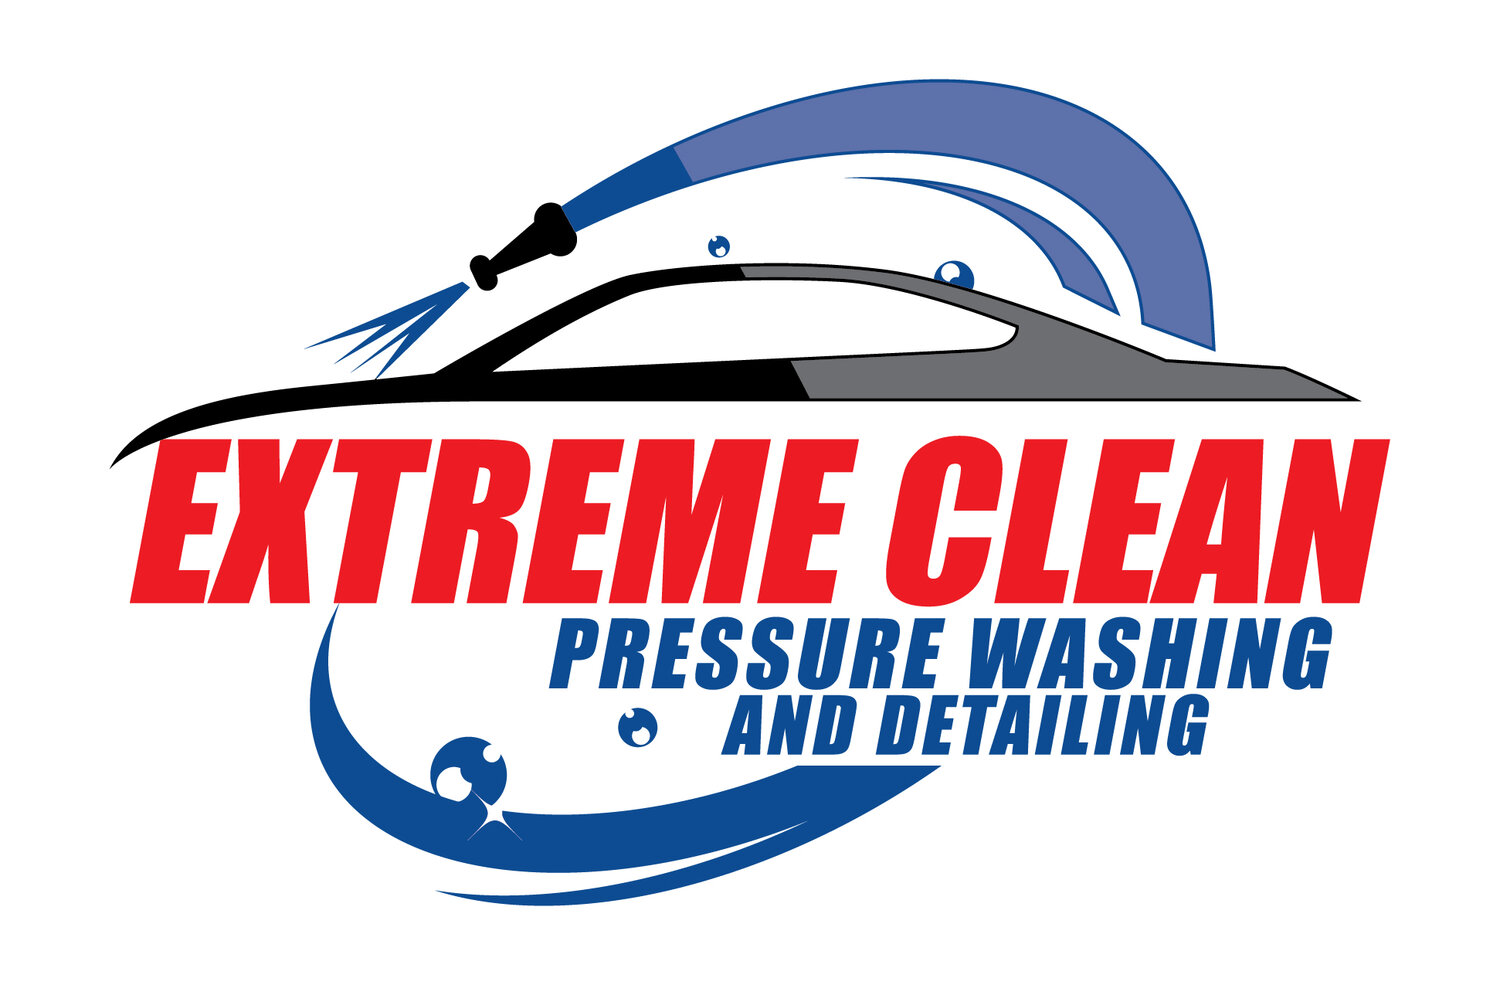 Extreme Clean Pressure Washing And Detailing